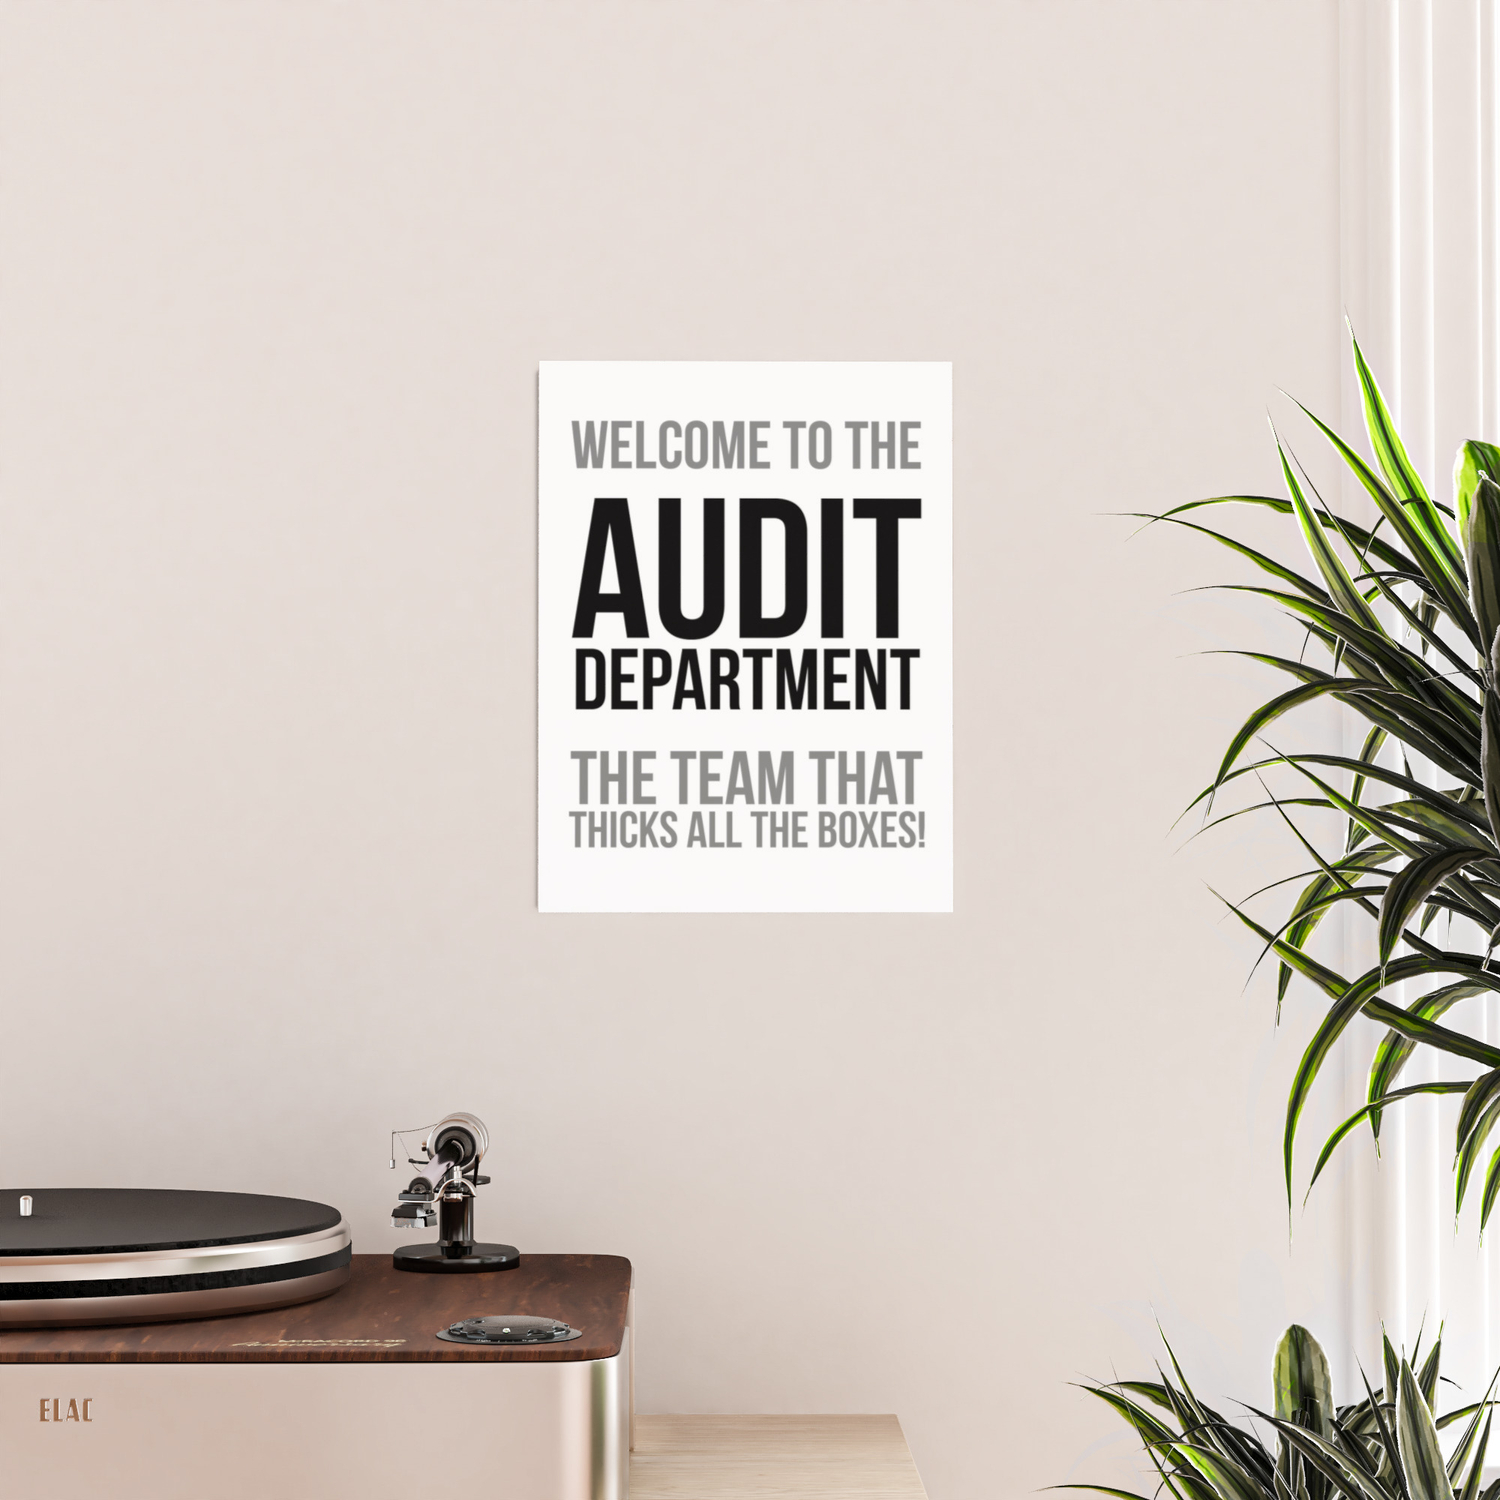 Details about   TRANSPARENT Auditor Definition Auditor Gift Office Wall Decor Auditor Poster 